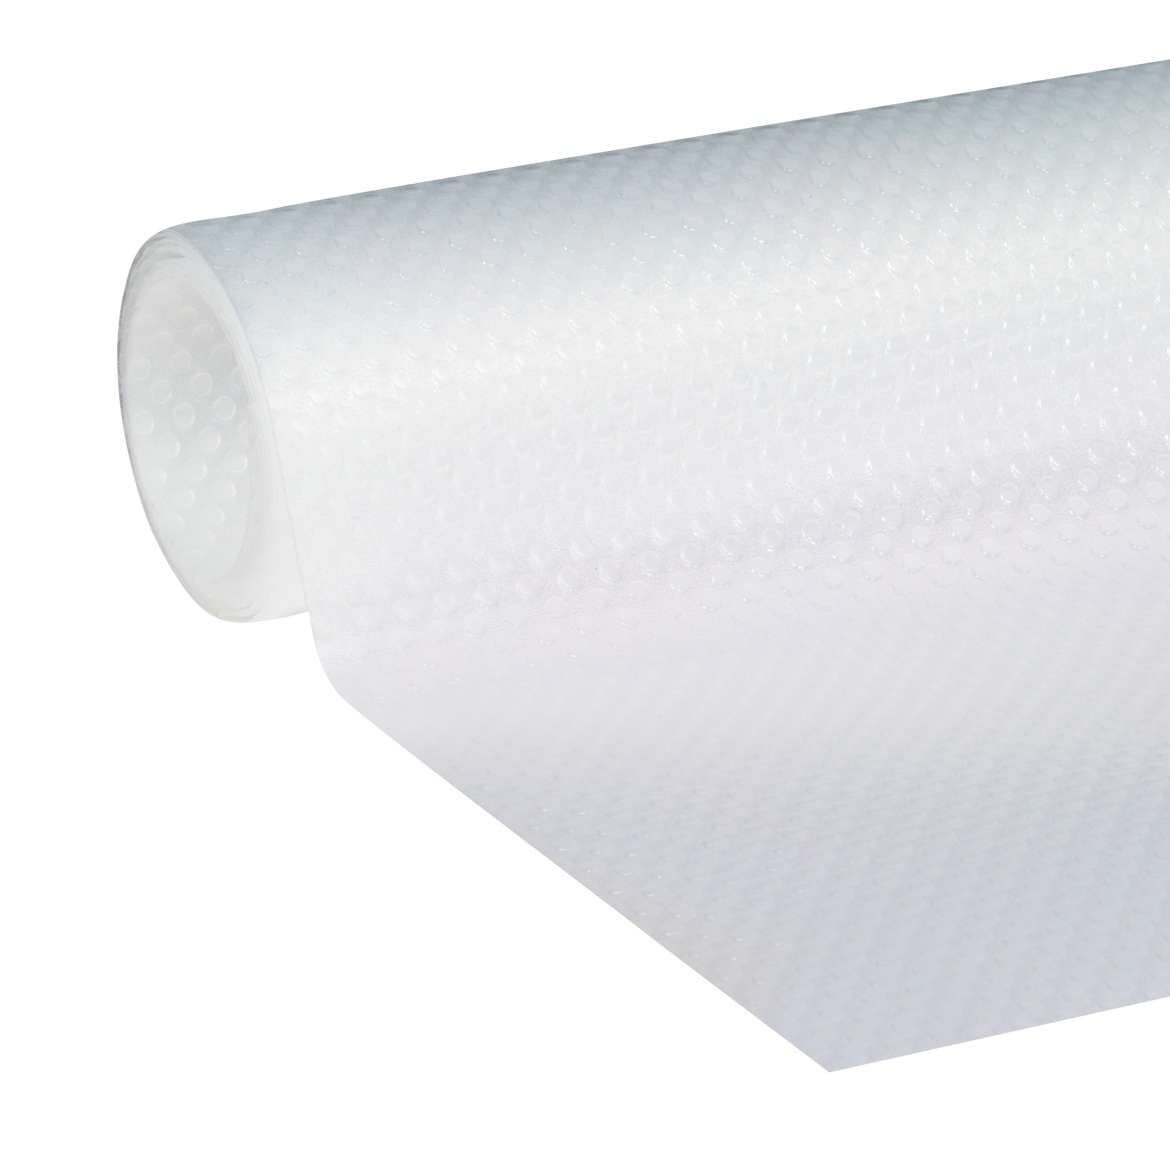 Duck Clear Classic EasyLiner 12-in x 20-ft Clear Shelf Liner in the Shelf  Liners department at